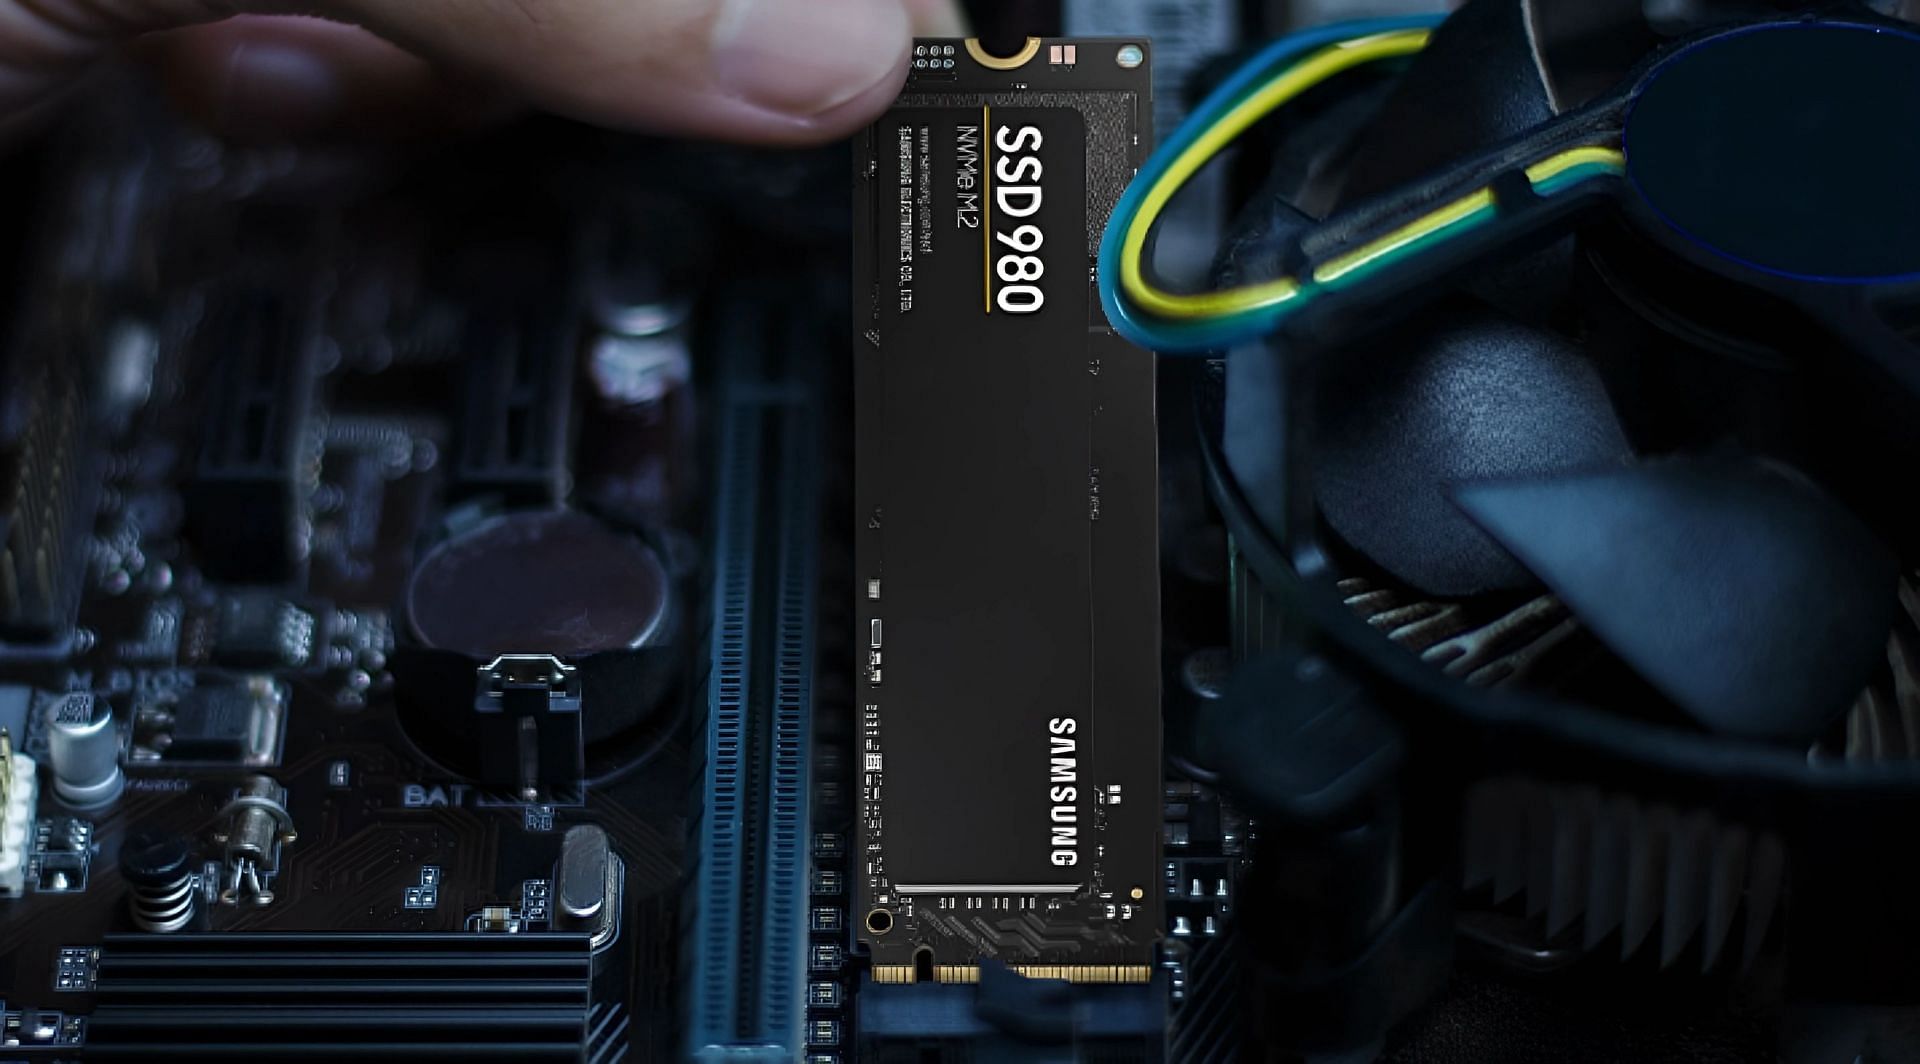 DirectStorage technology will speed up game loading times (Image via Samsung)